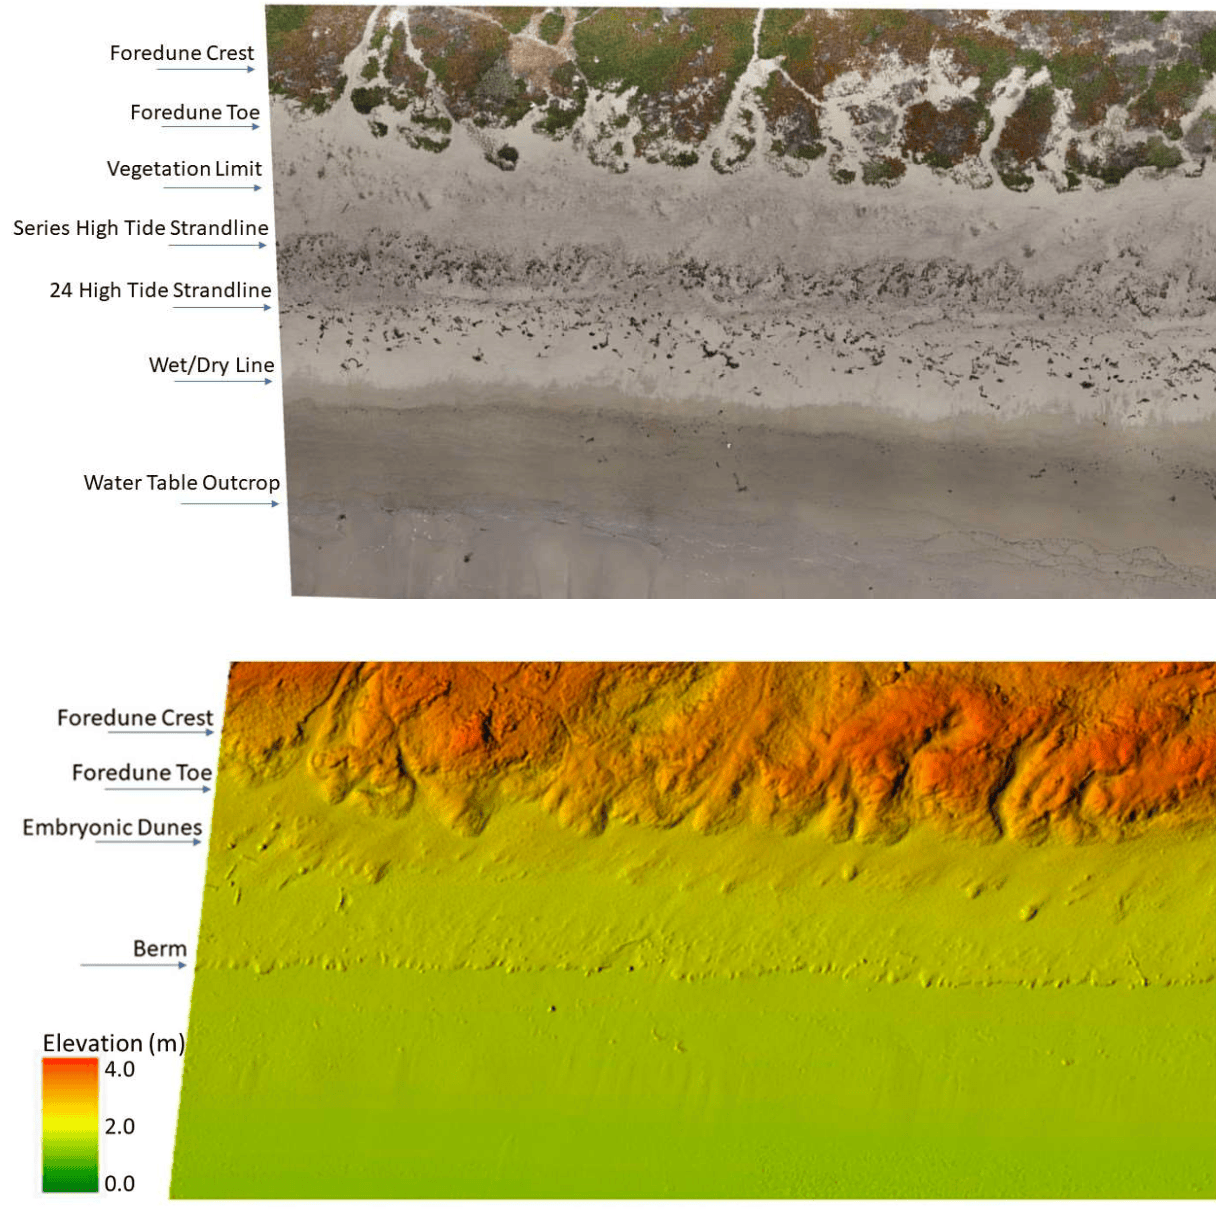 Orthomosaic and digital elevation model example for sea level rise study with drones, GNSS, GIS